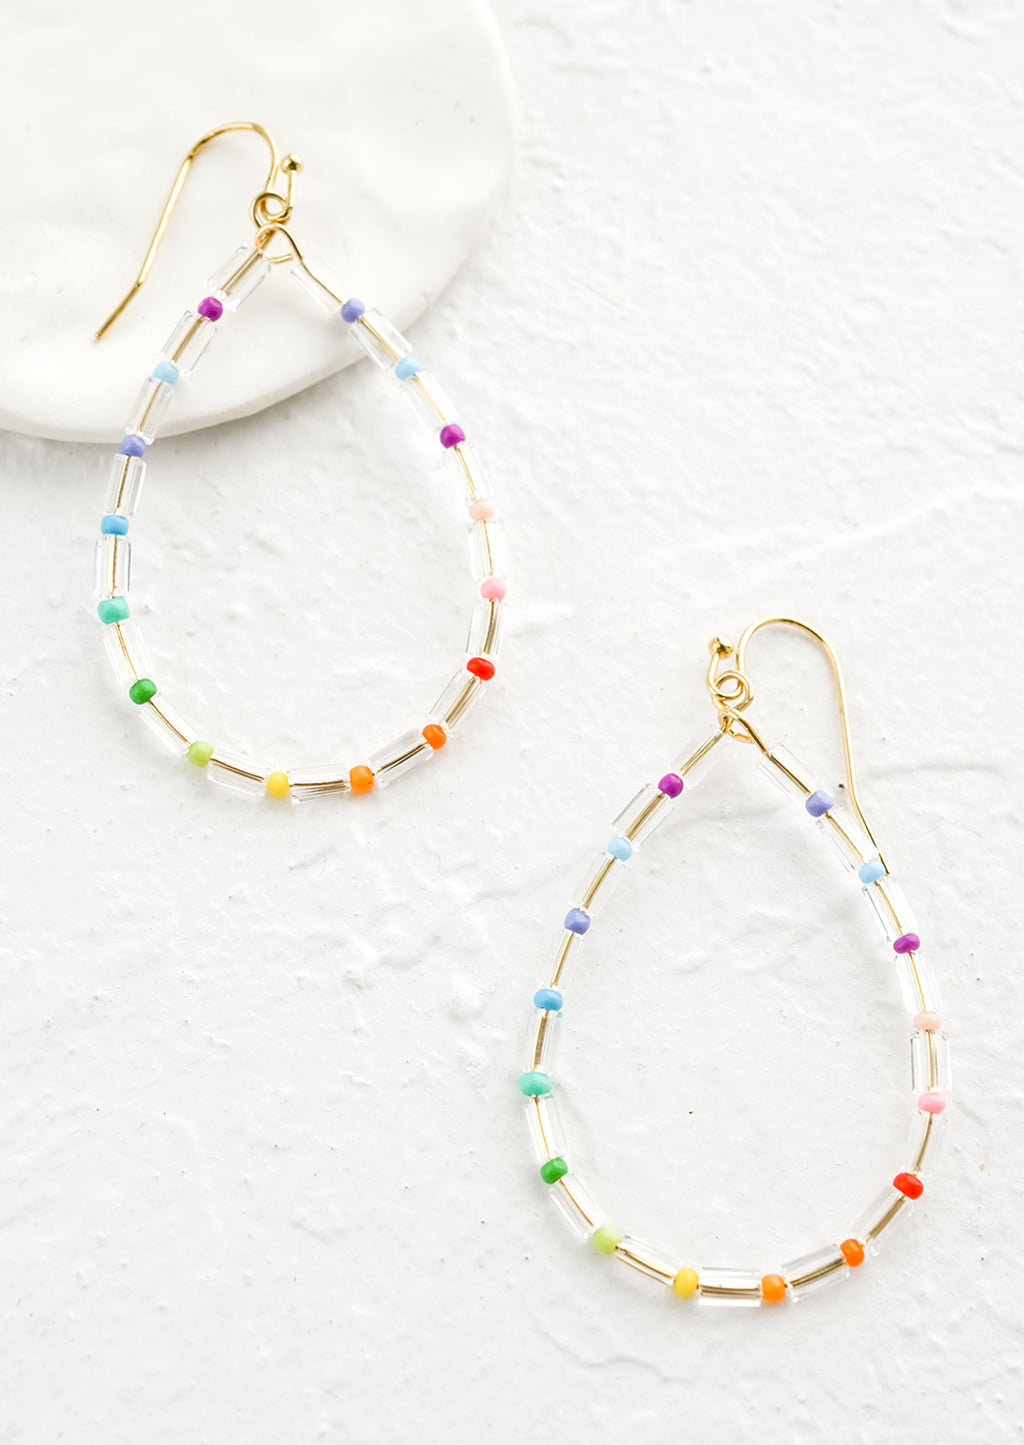 2: Beaded earrings in oval shape with clear beads alternating with seed beads in rainbow colors.